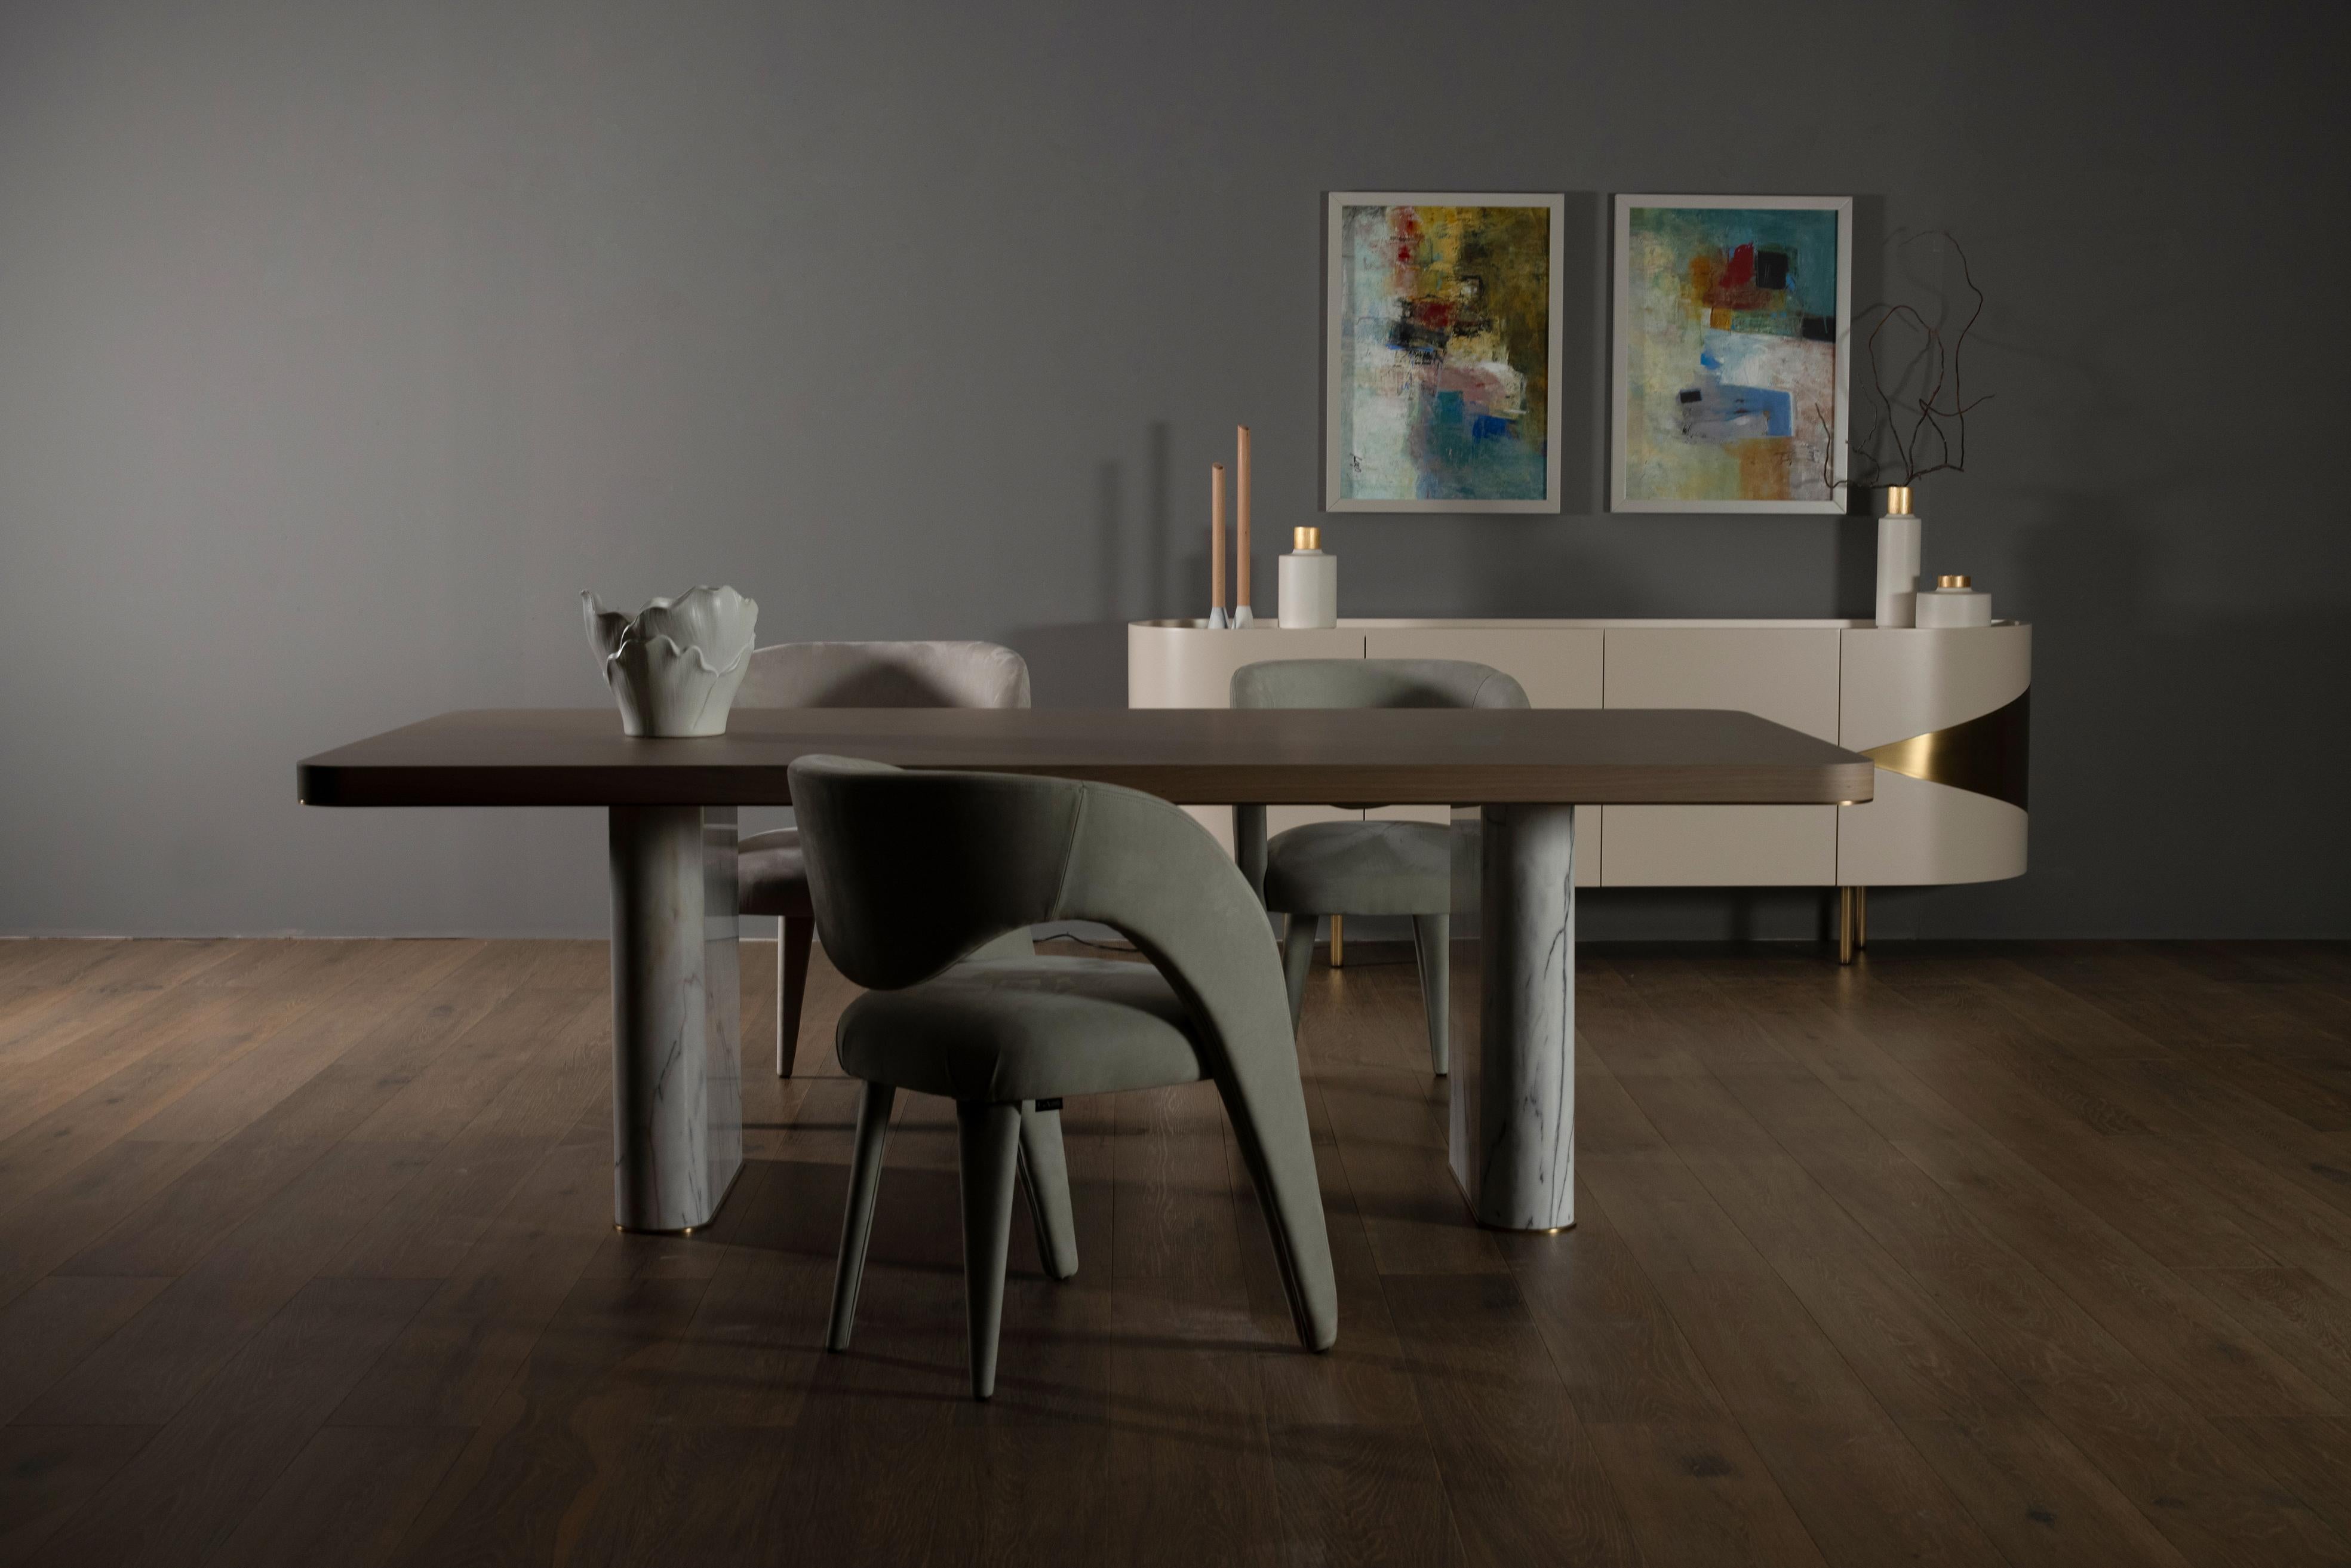 Fall Dining Table, Contemporary Collection, Handcrafted in Portugal - Europe by Greenapple.

A modern allure emerges with Fall dining table, enhancing any dining space by taking the exceptional craftmanship and design to a new level.

The Calacatta